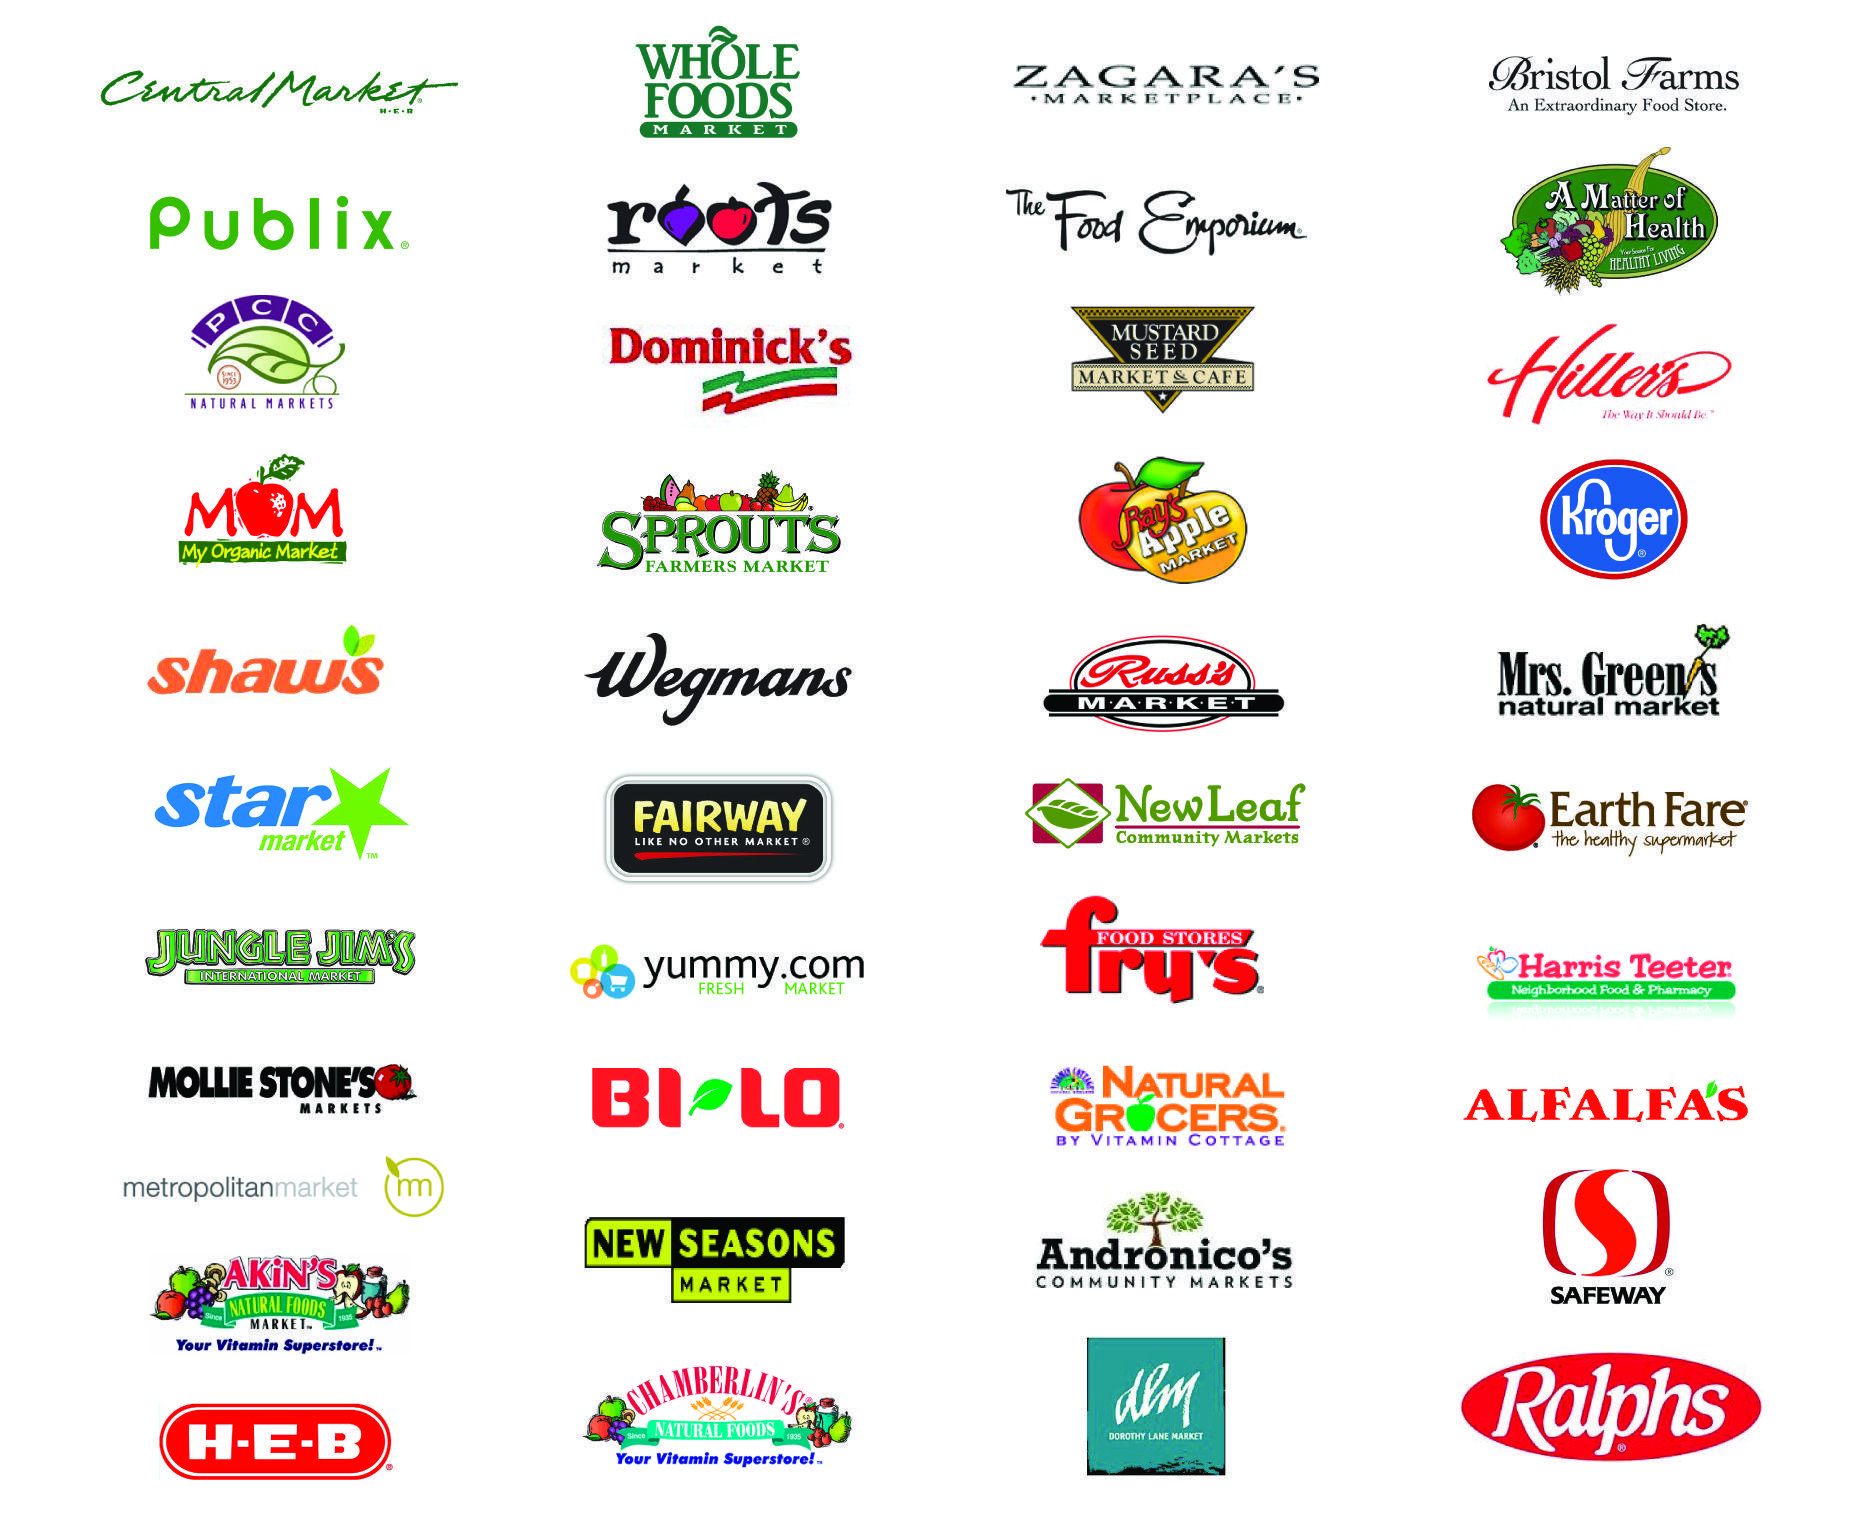 American Retail Company Logo - Best Image of American Retail Company Logos Logos Quiz